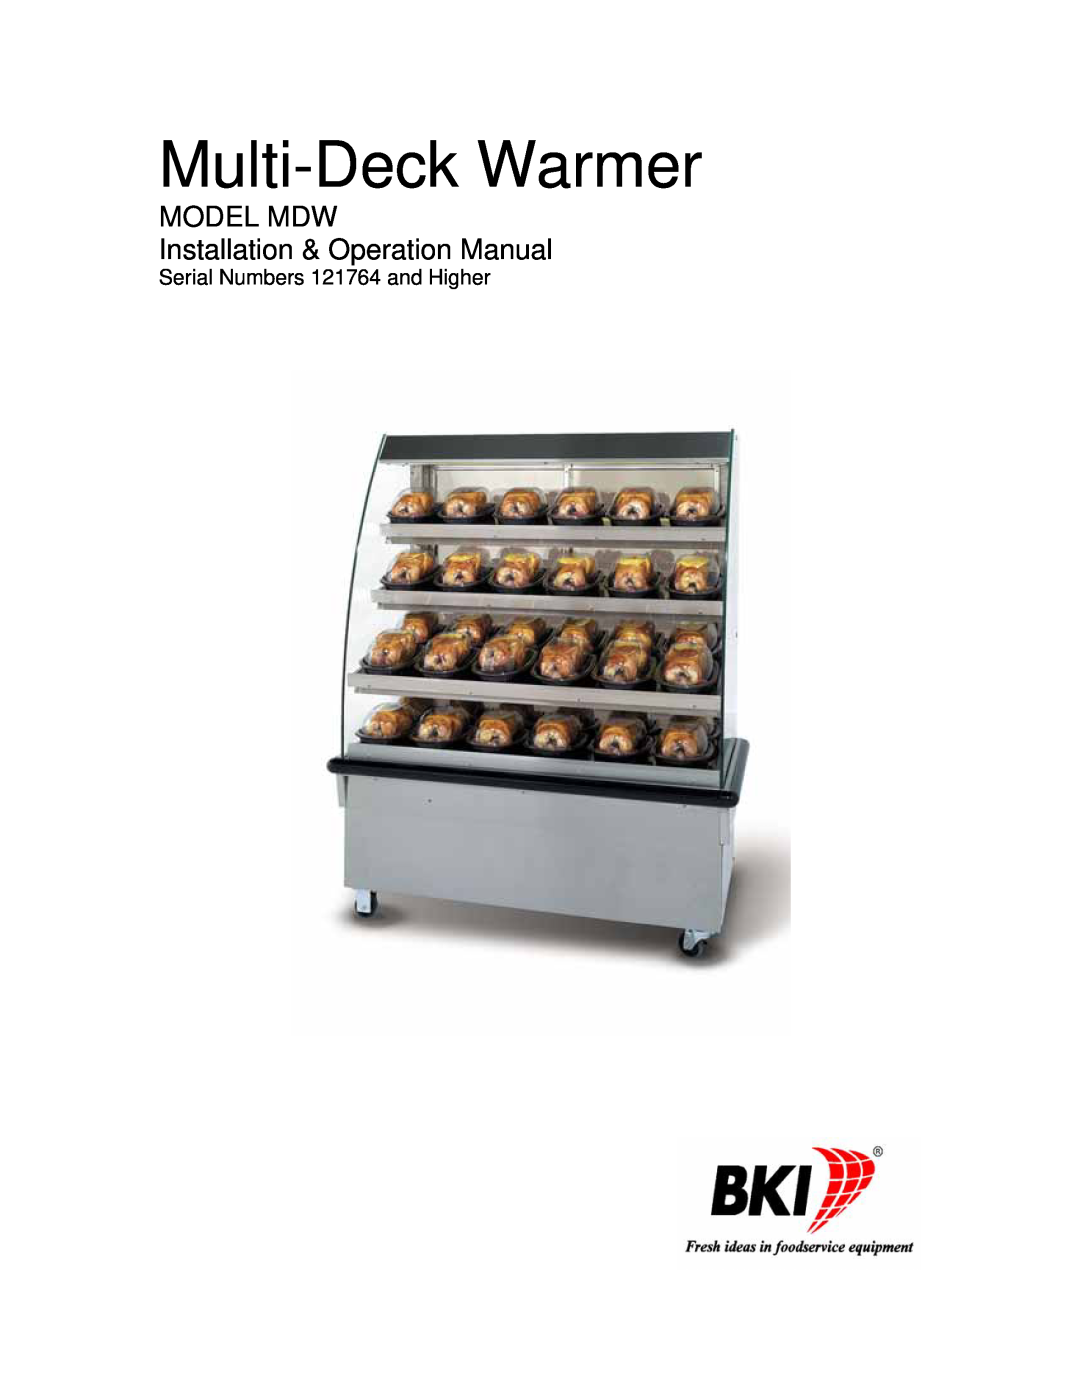 Bakers Pride Oven MDW operation manual Multi-DeckWarmer, Serial Numbers 121764 and Higher 